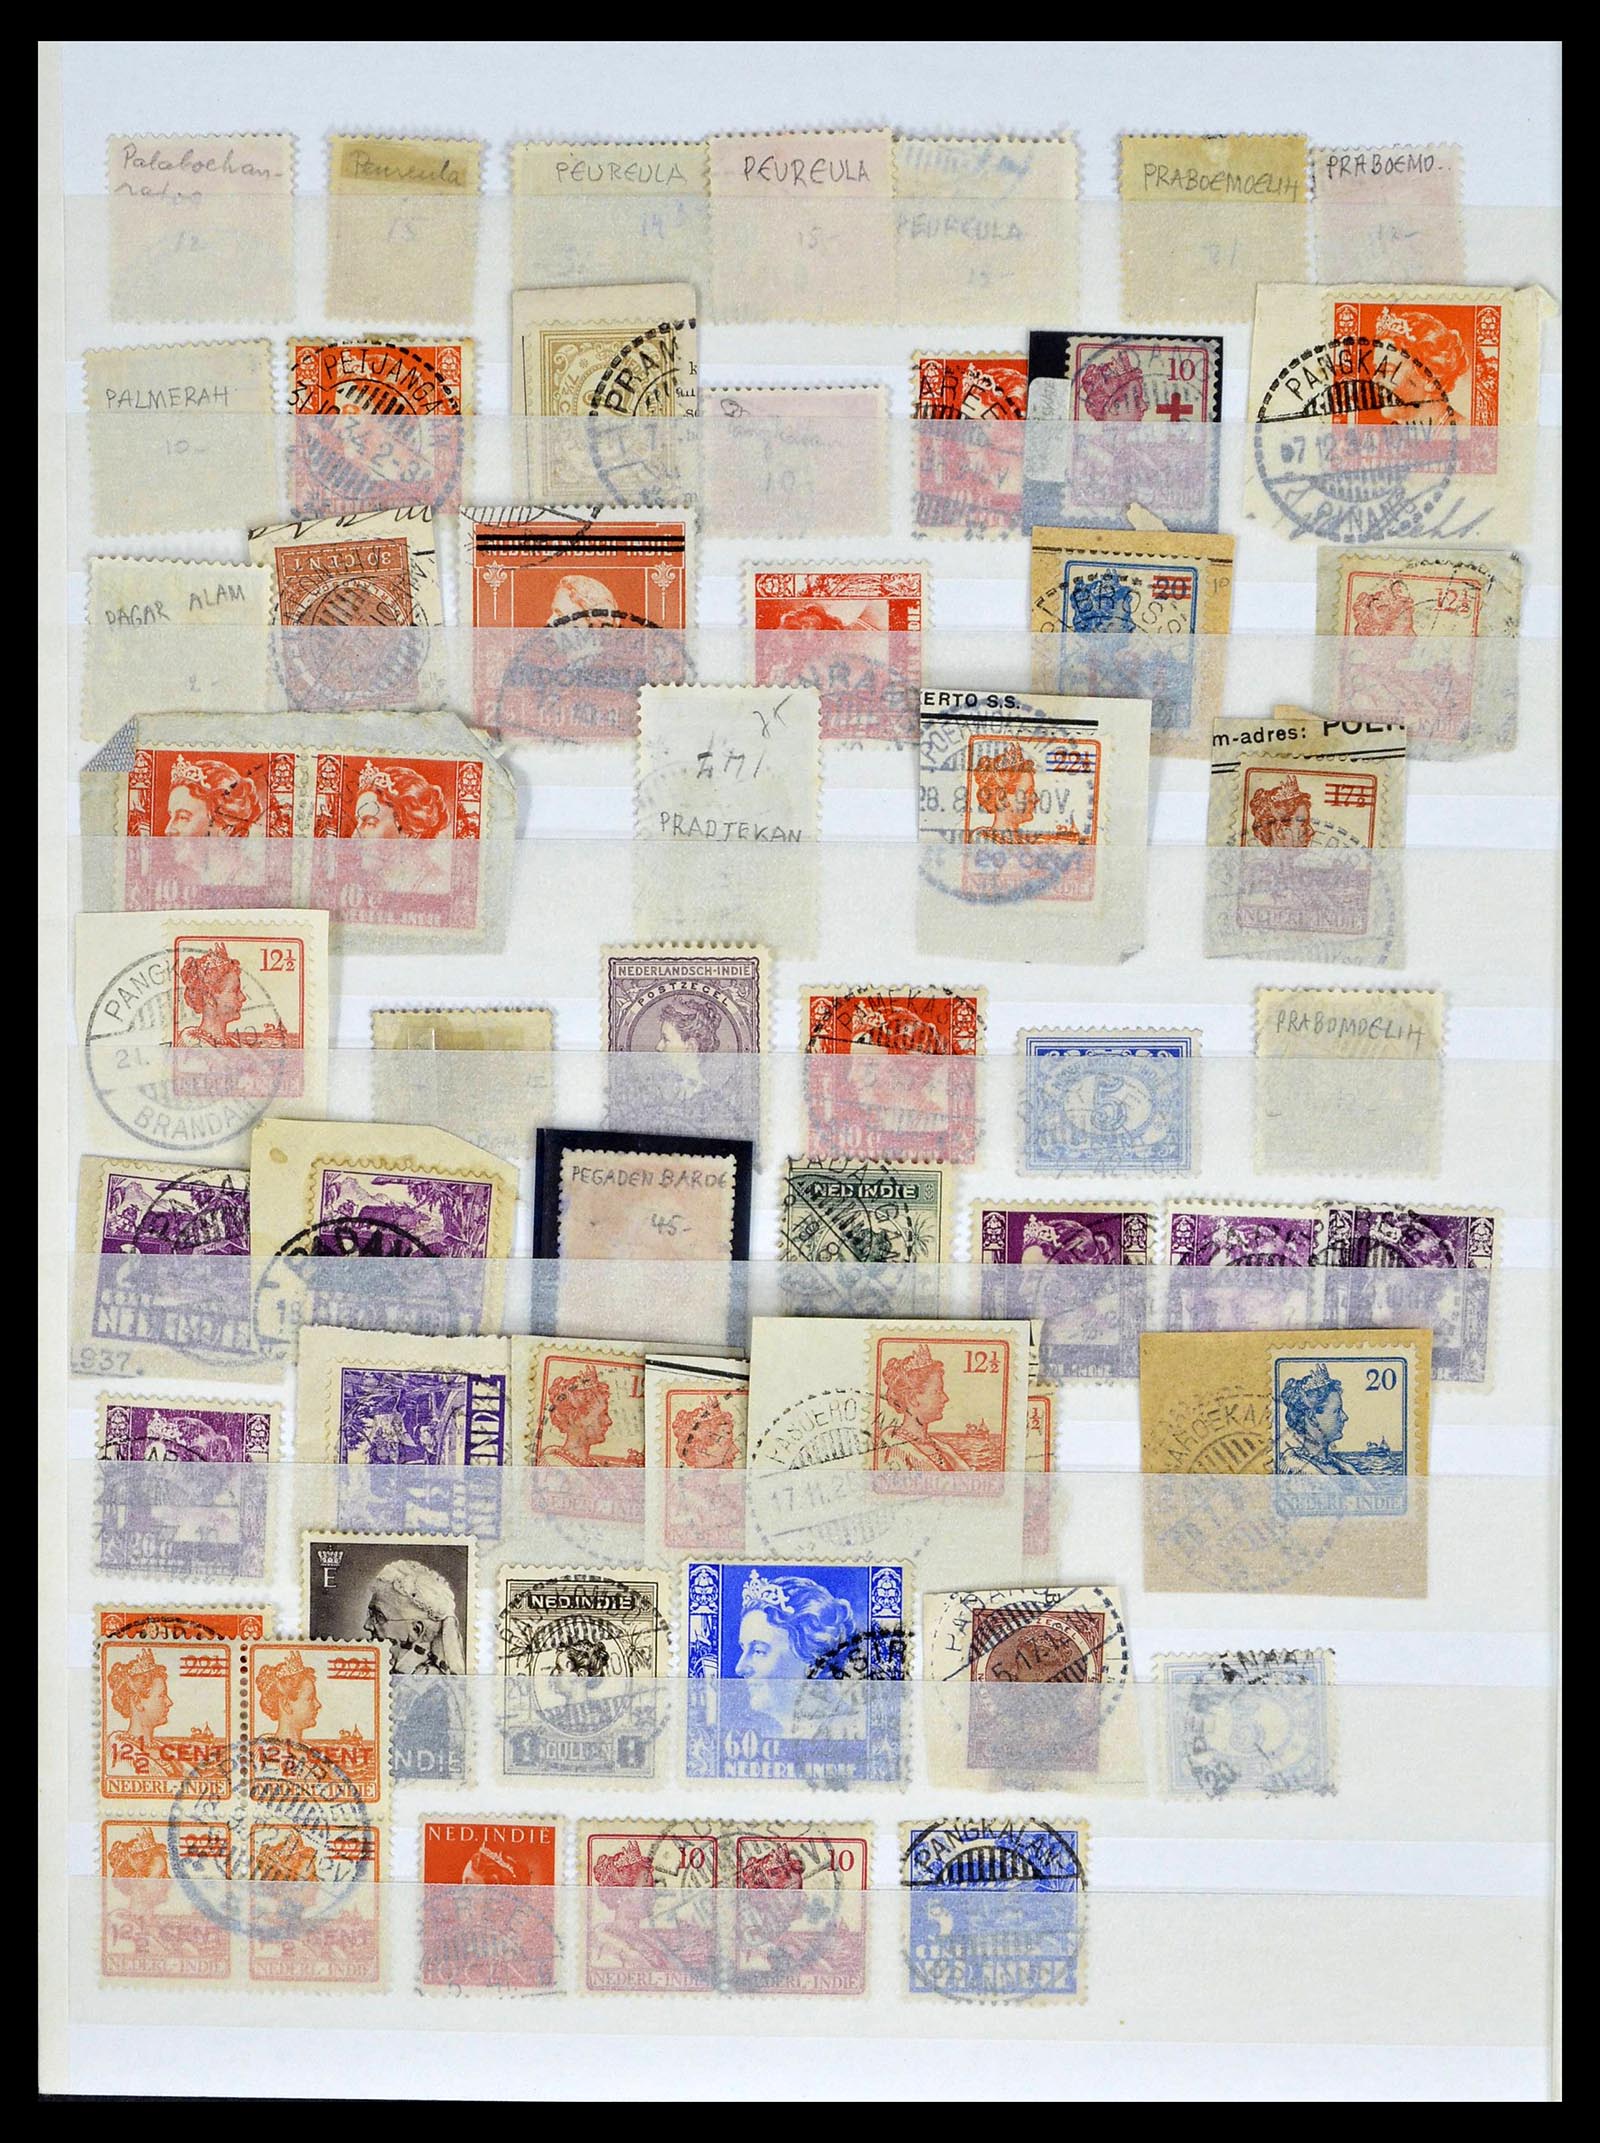 38783 0287 - Stamp collection 38783 Dutch east Indies cancels 1870-1948.